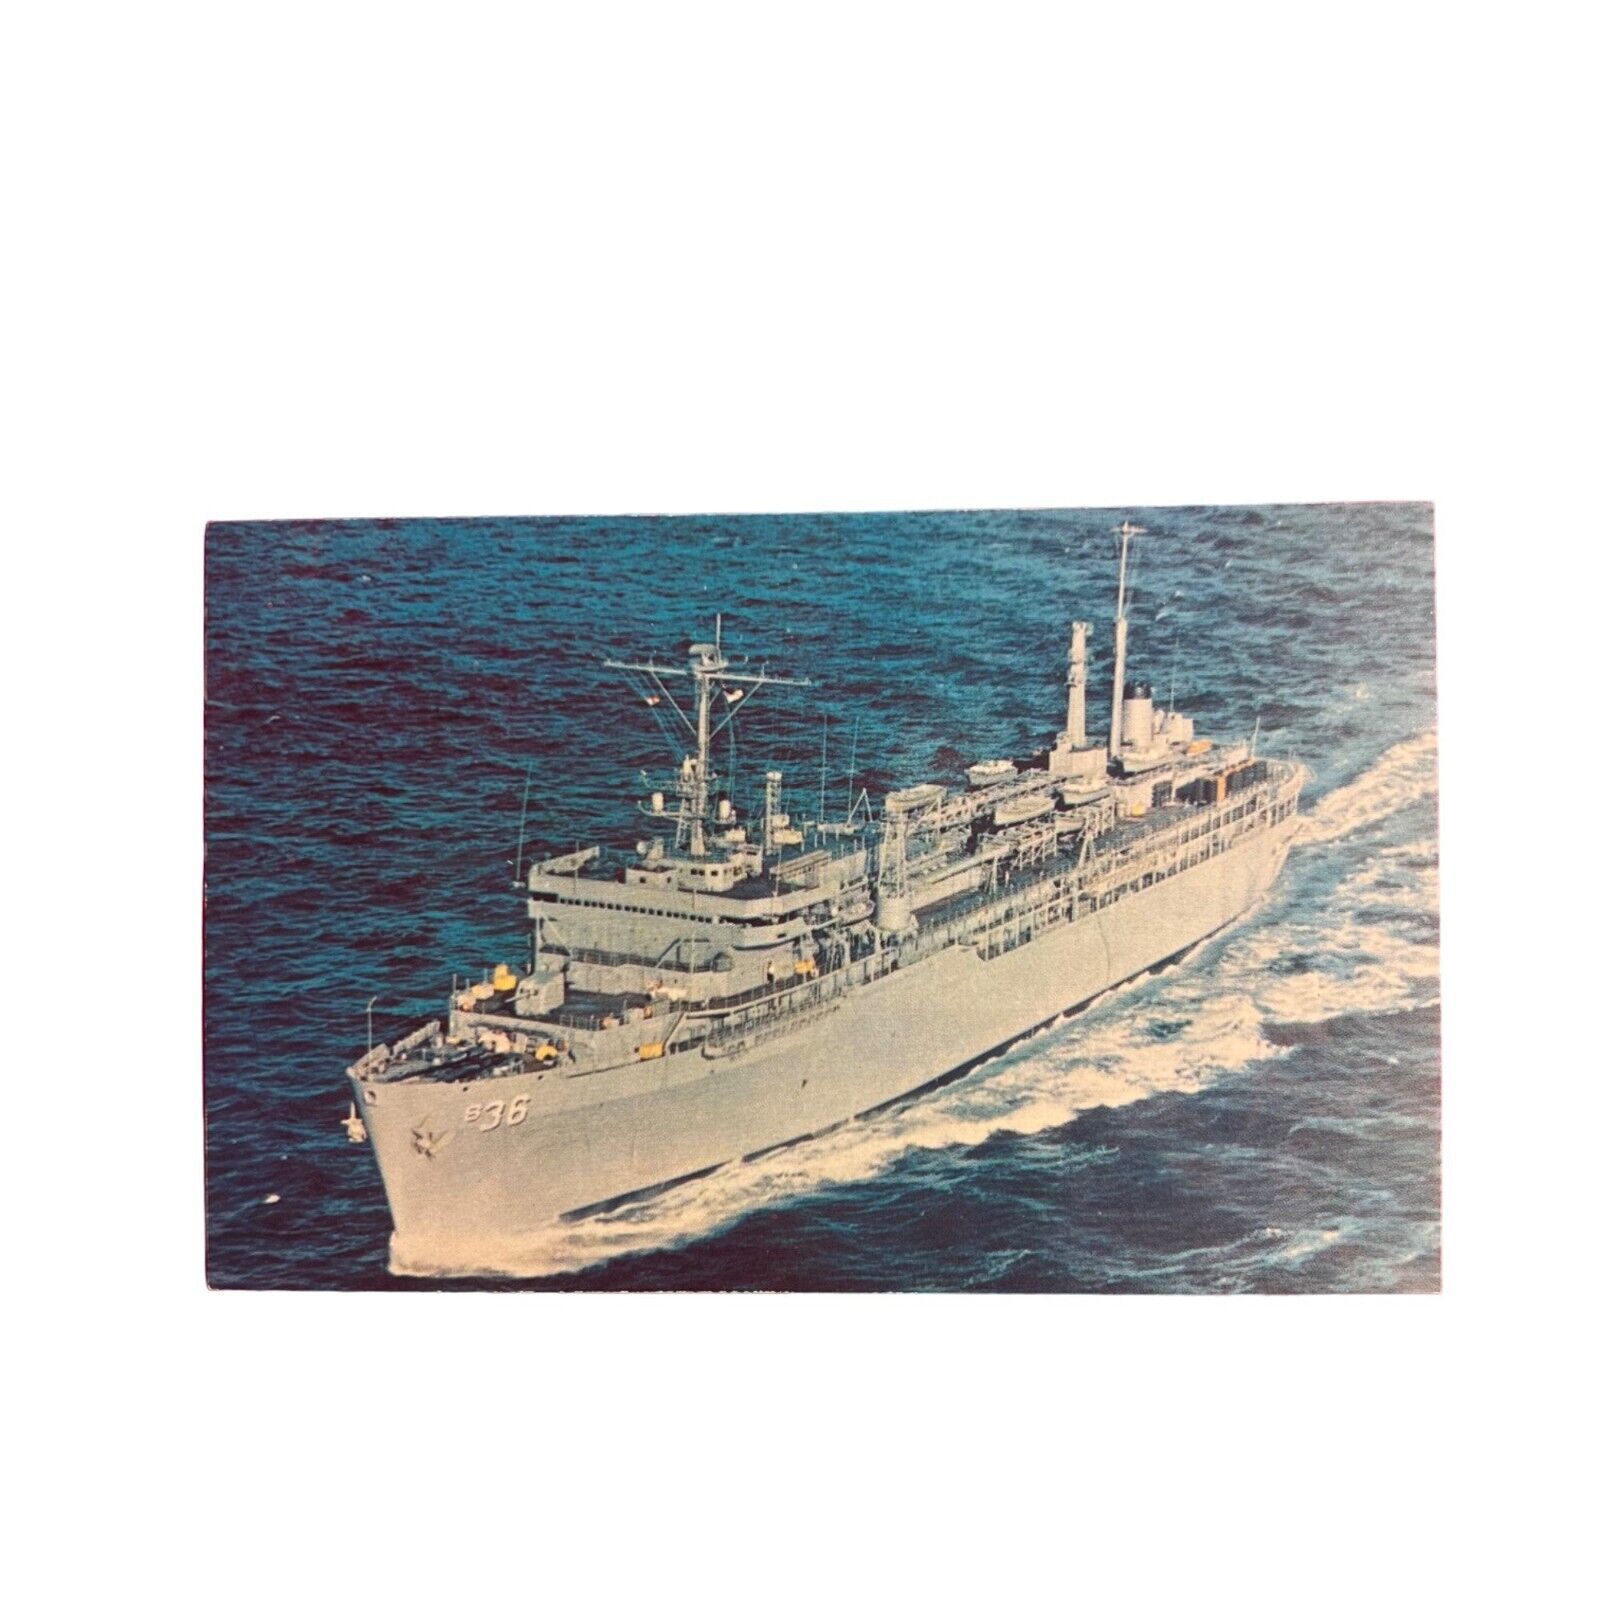 VTG Postcard Unposted Shipping USS LY Spear (AS-36)  1970 #78